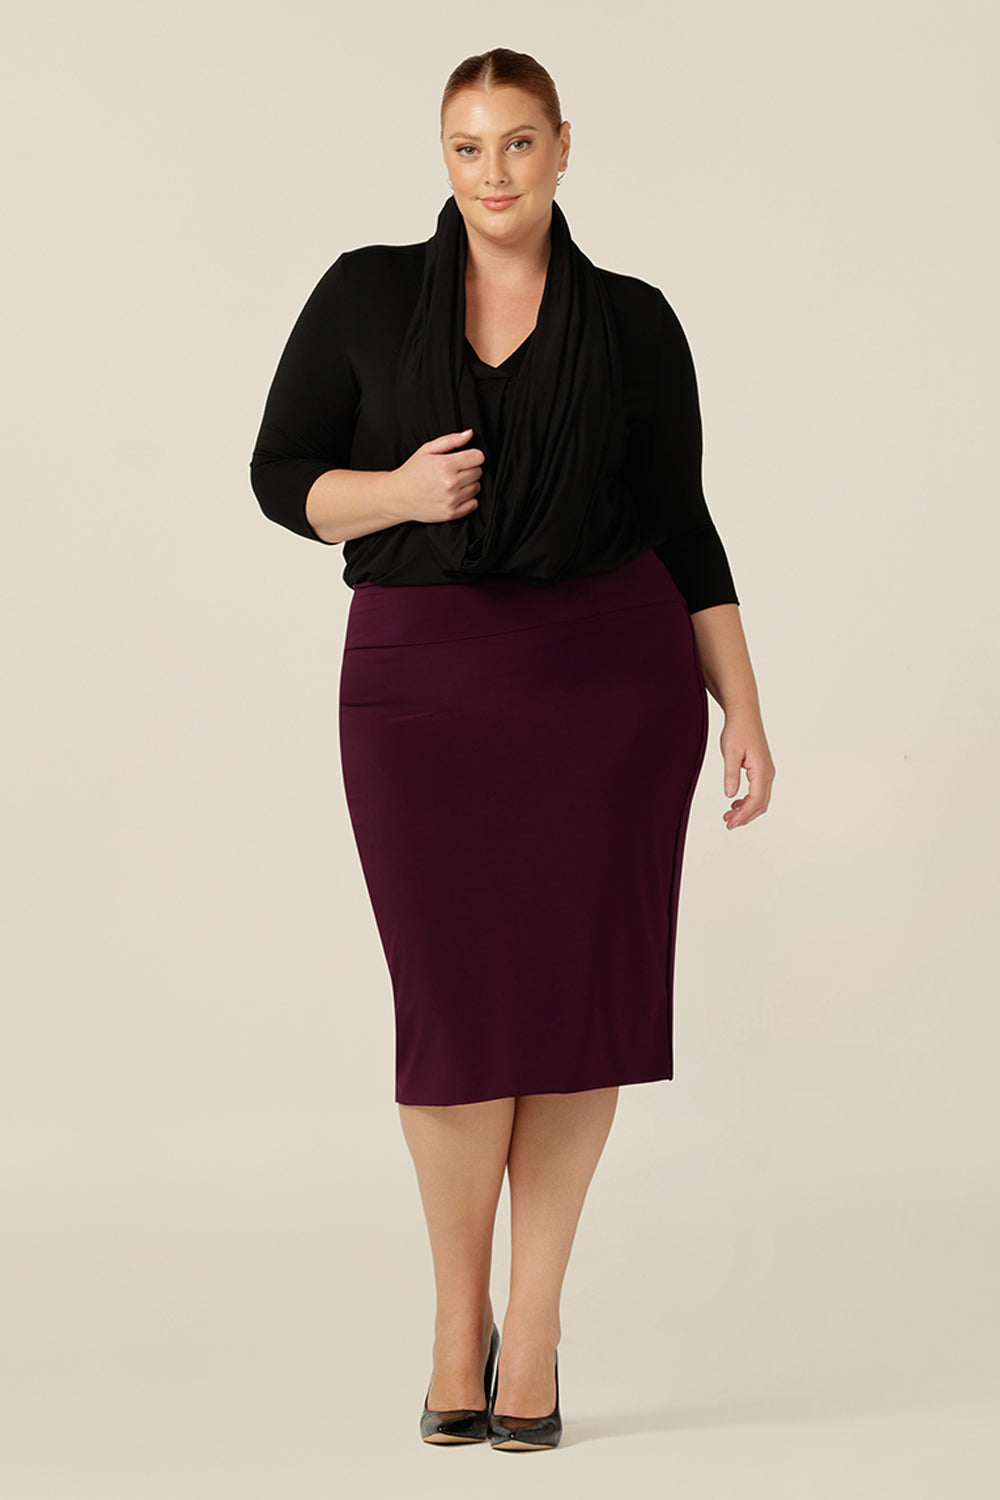 Made in Australia, this complete outfit showcases work wear for curvy women. Wearing a knee length tube skirt in Mulberry stretch jersey, black long sleeve top and black scarf, this size 18 woman layers up her work wear for a complete corporate wardrobe.